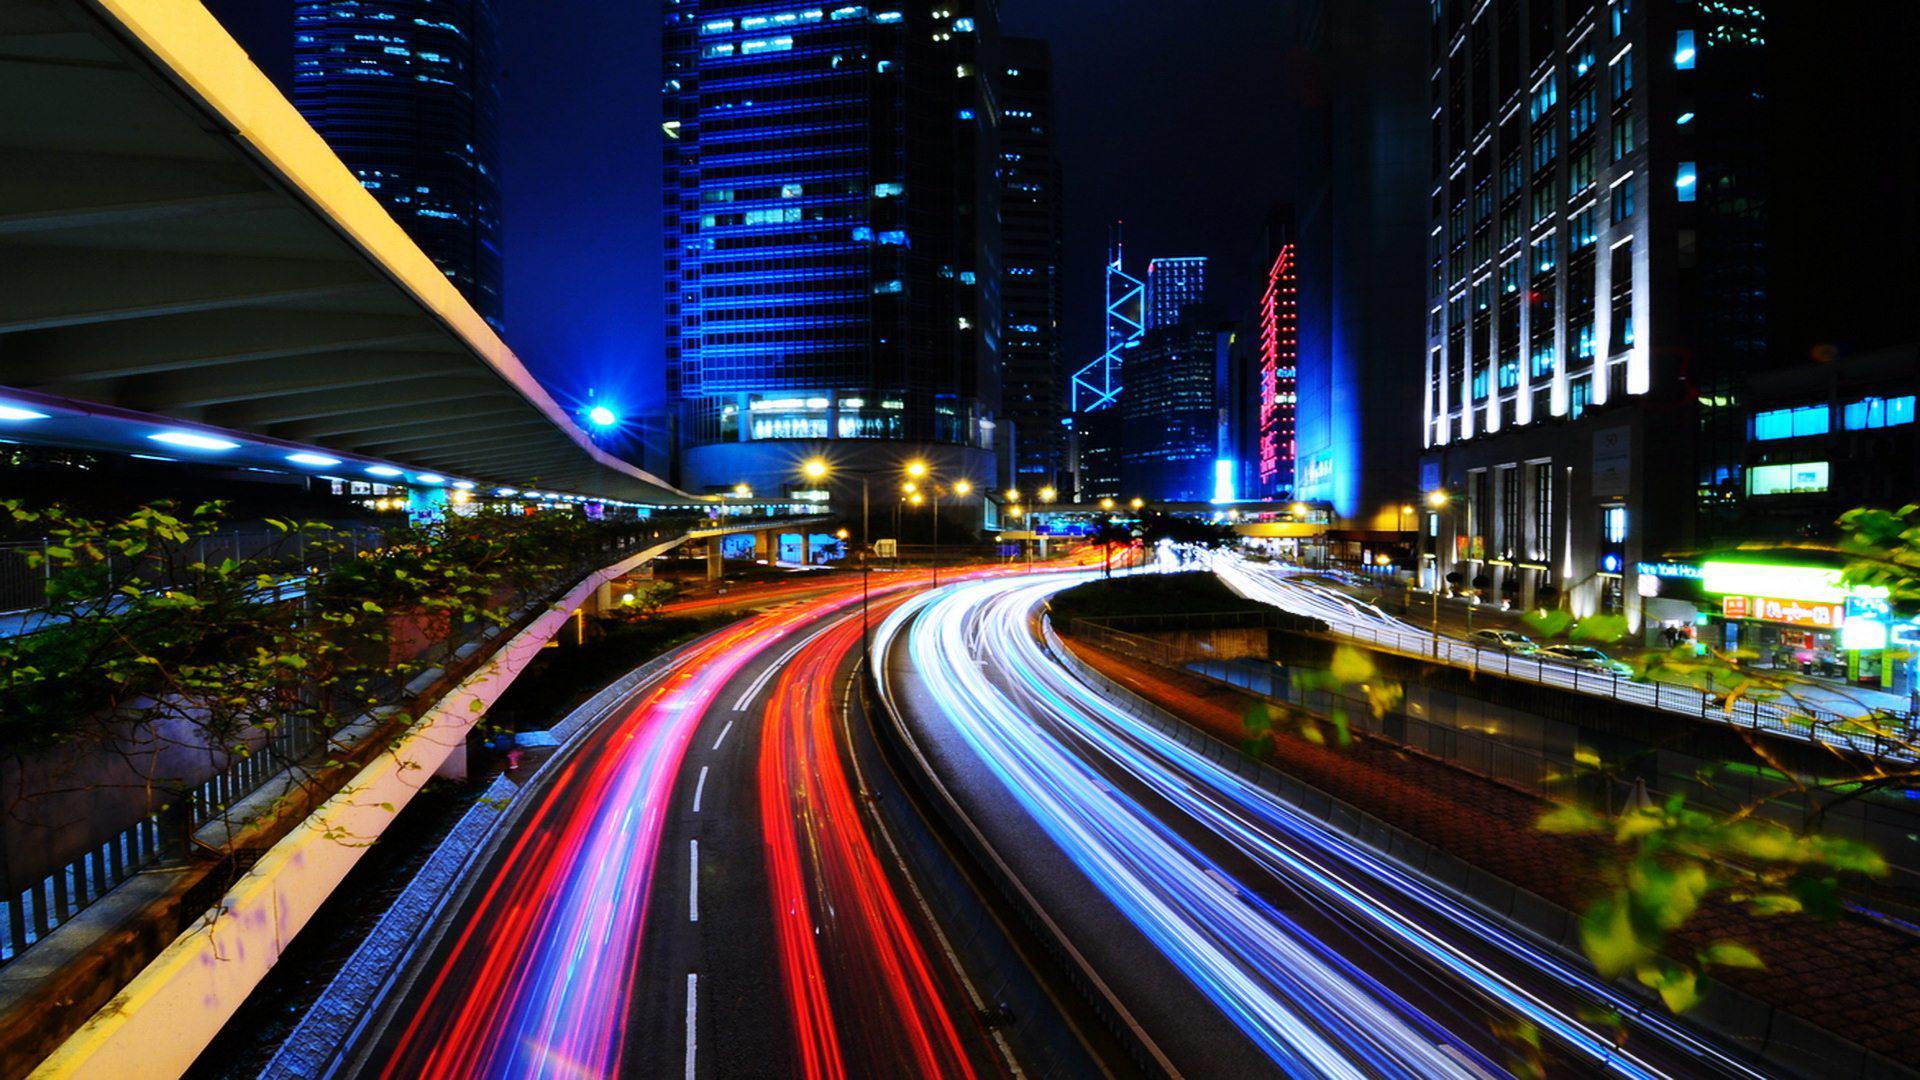 Free 1920x1080 Light Trails In City Wallpaper Full HD 1080p Background